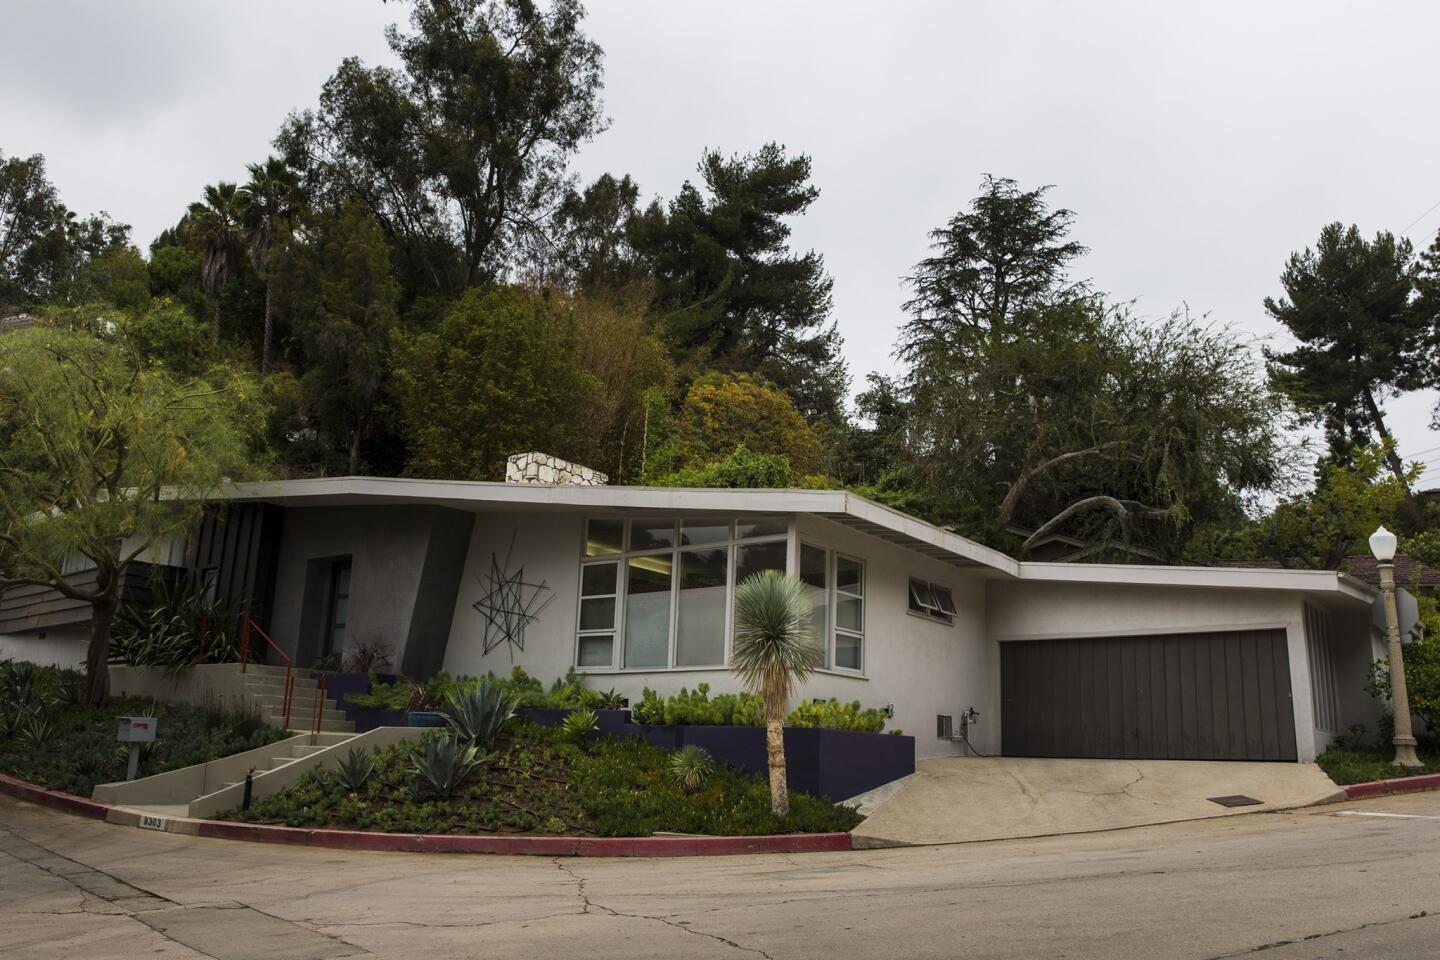 The 1956 home of Emily Ain (daughter of famed architect Gregory Ain) and her husband, architect James Matson. When the couple first looked at the house -- a 2,300-square-foot, three-bedroom, three-bath, Beverly Crest Home -- their real estate agent discouraged them from making an offer.